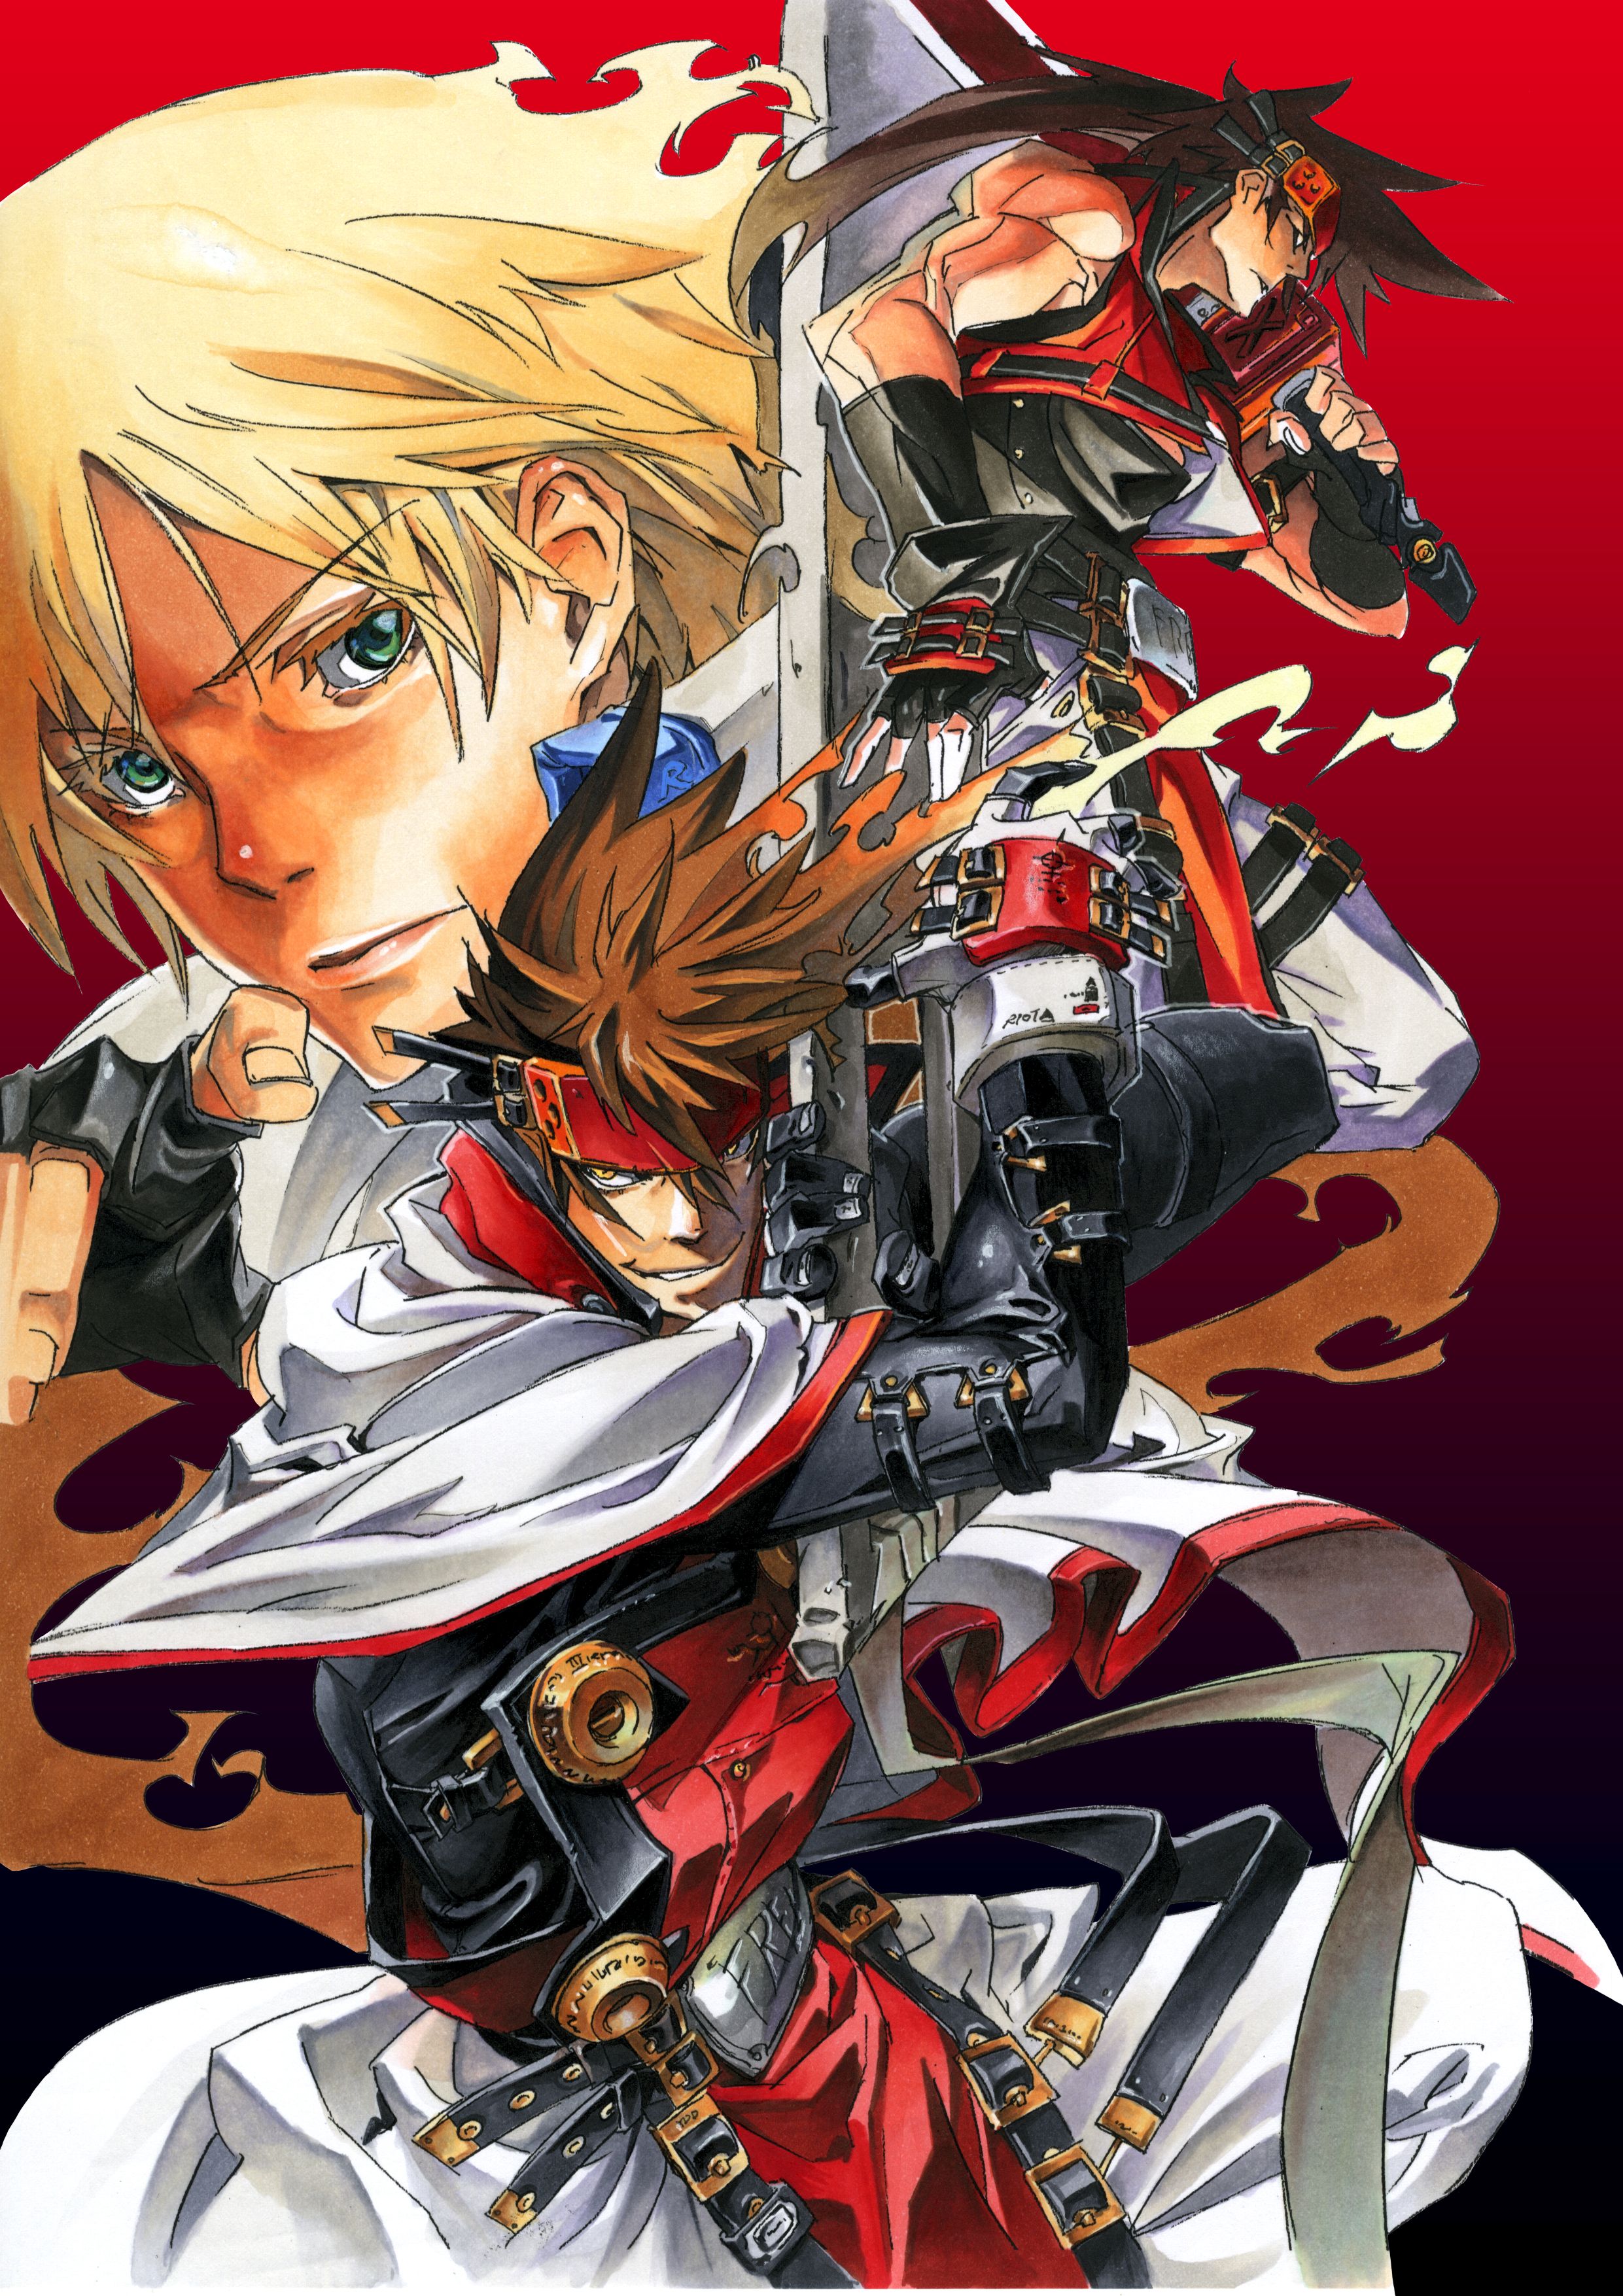 Guilty Gear 20th Anniversary Edition